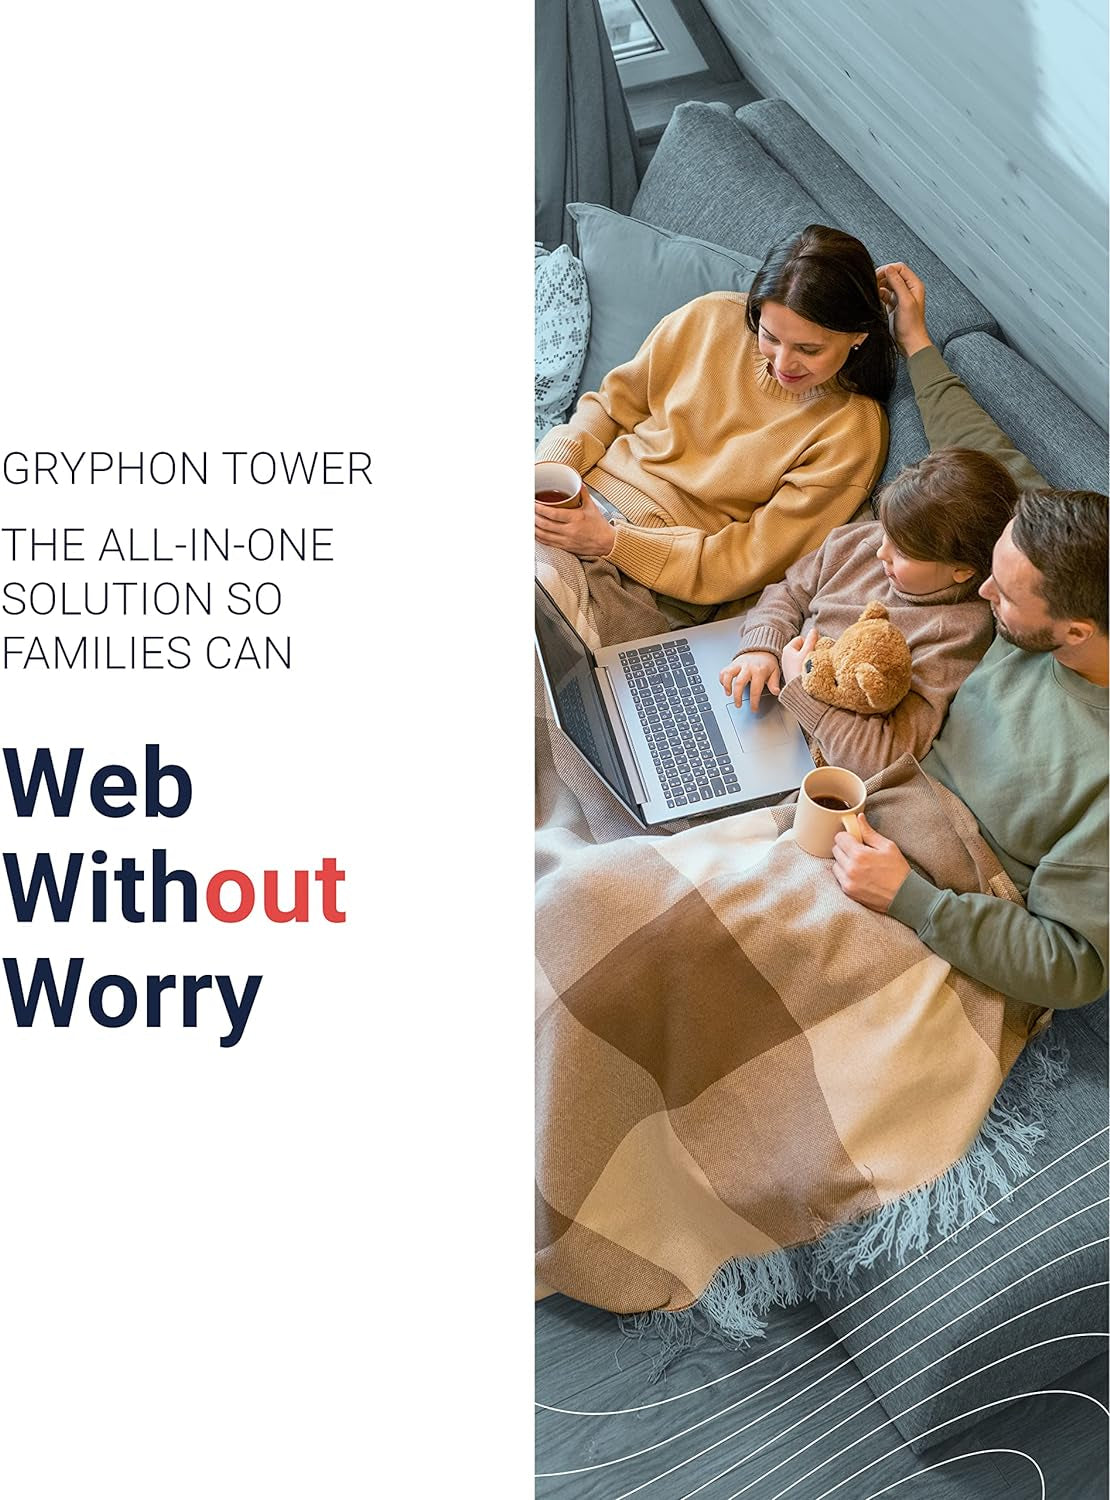 Tower Super-Fast Mesh Wifi Router – Advanced Firewall Security, Parental Controls, and Content Filters – Tri-Band 3 Gbps, 3000 Sq. Ft. Full Home Coverage per Mesh Router